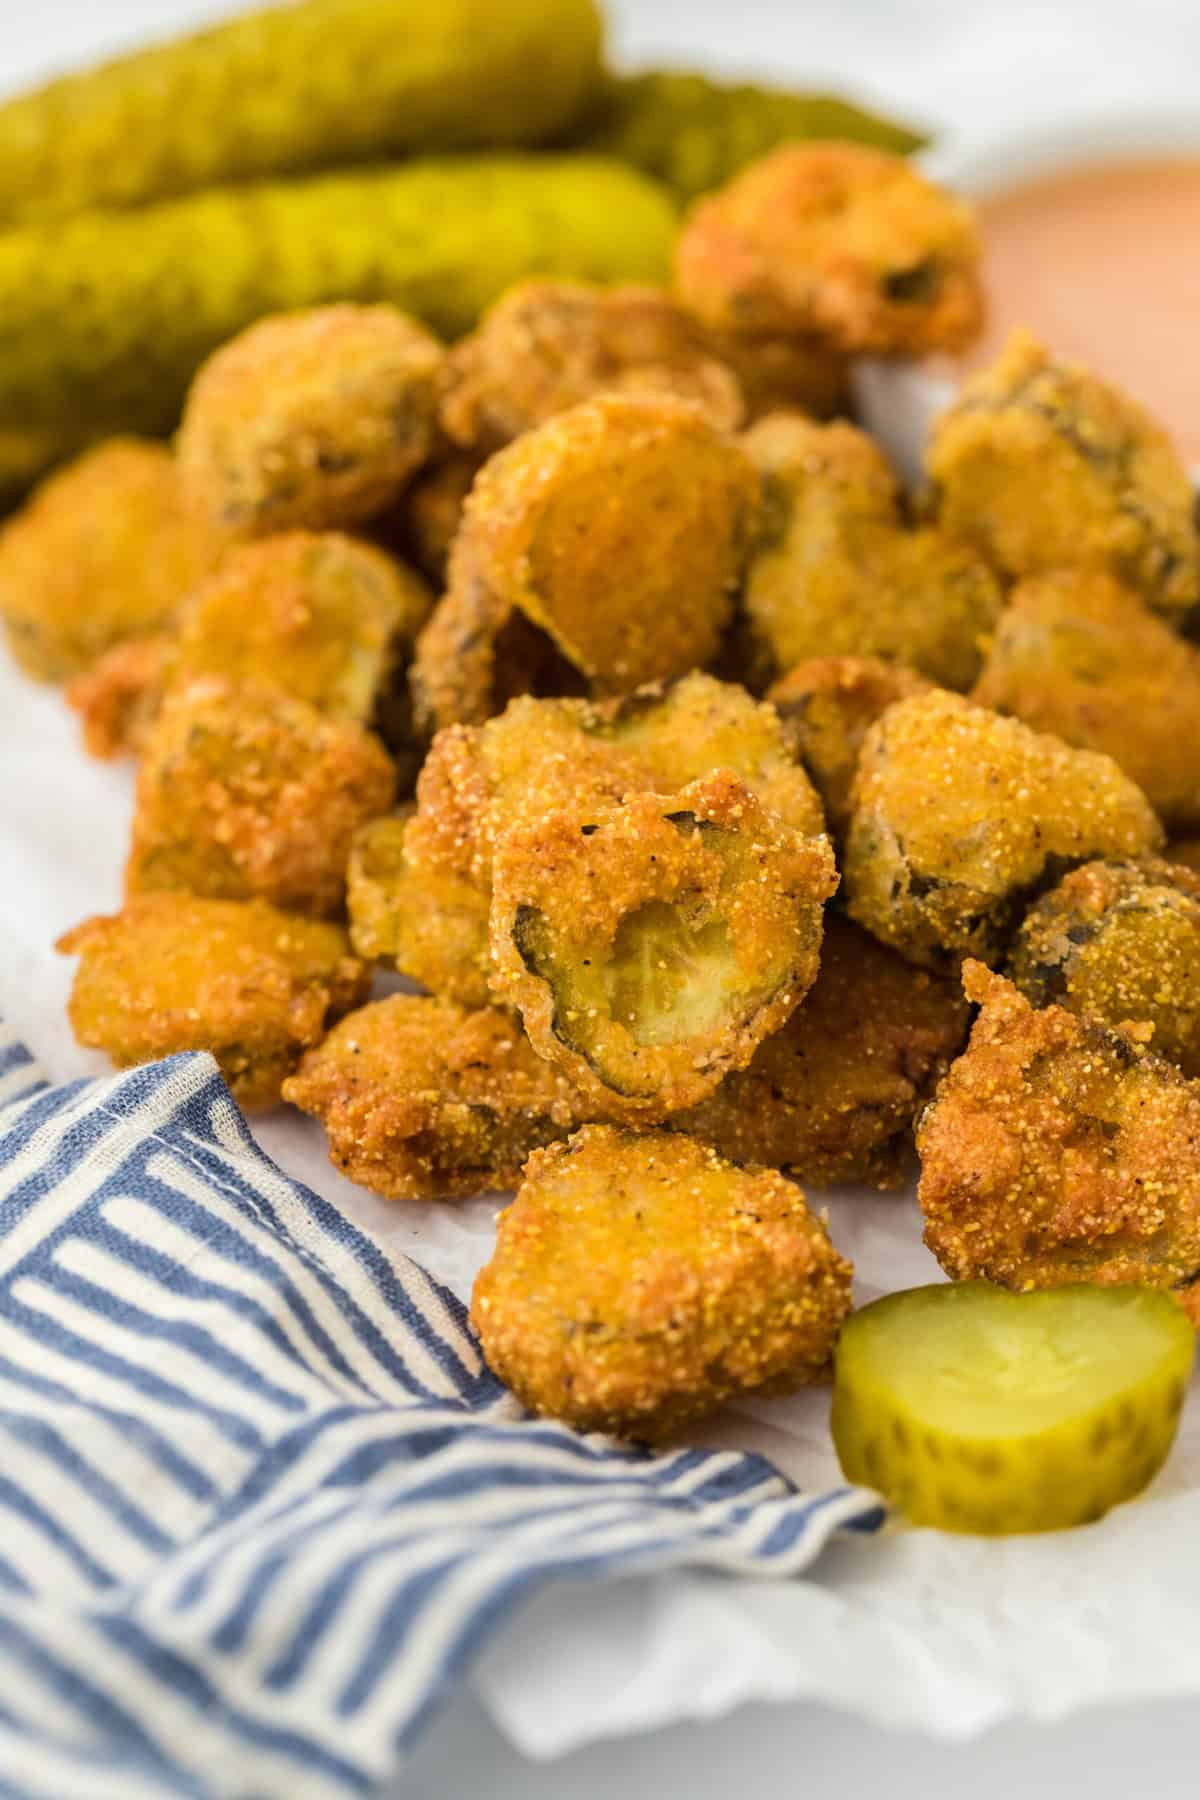 A fried pickles recipe against white background with striped napkin and whole dill pickles in the background